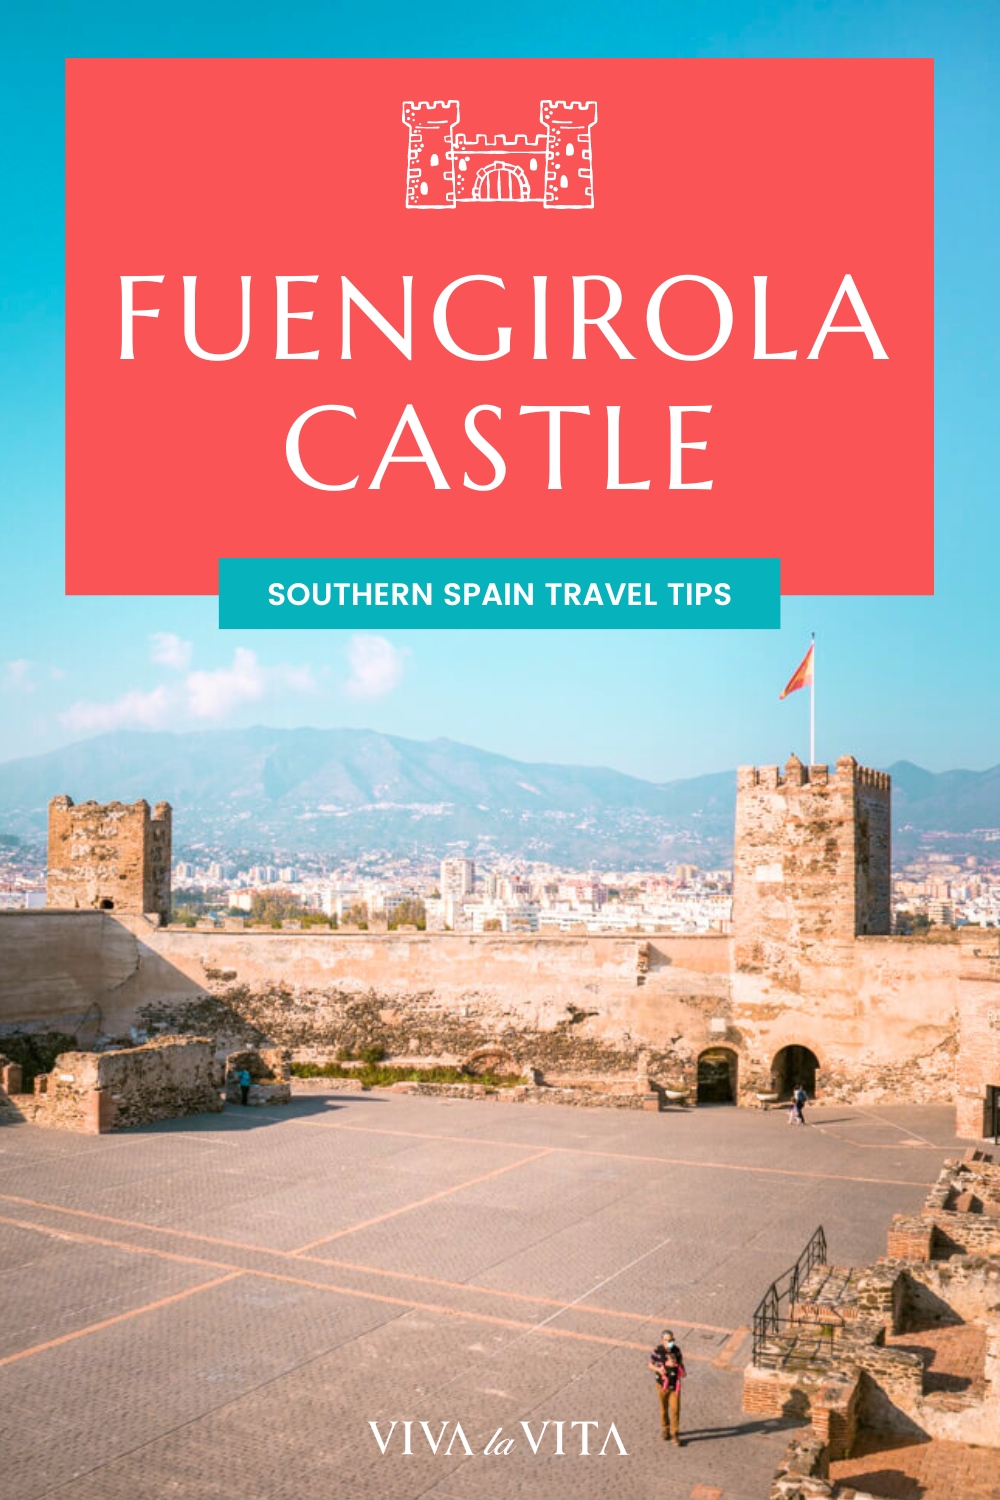 pinterest image showing fuengirola castle and a headline - fuengirola castle, southern spain travel tips